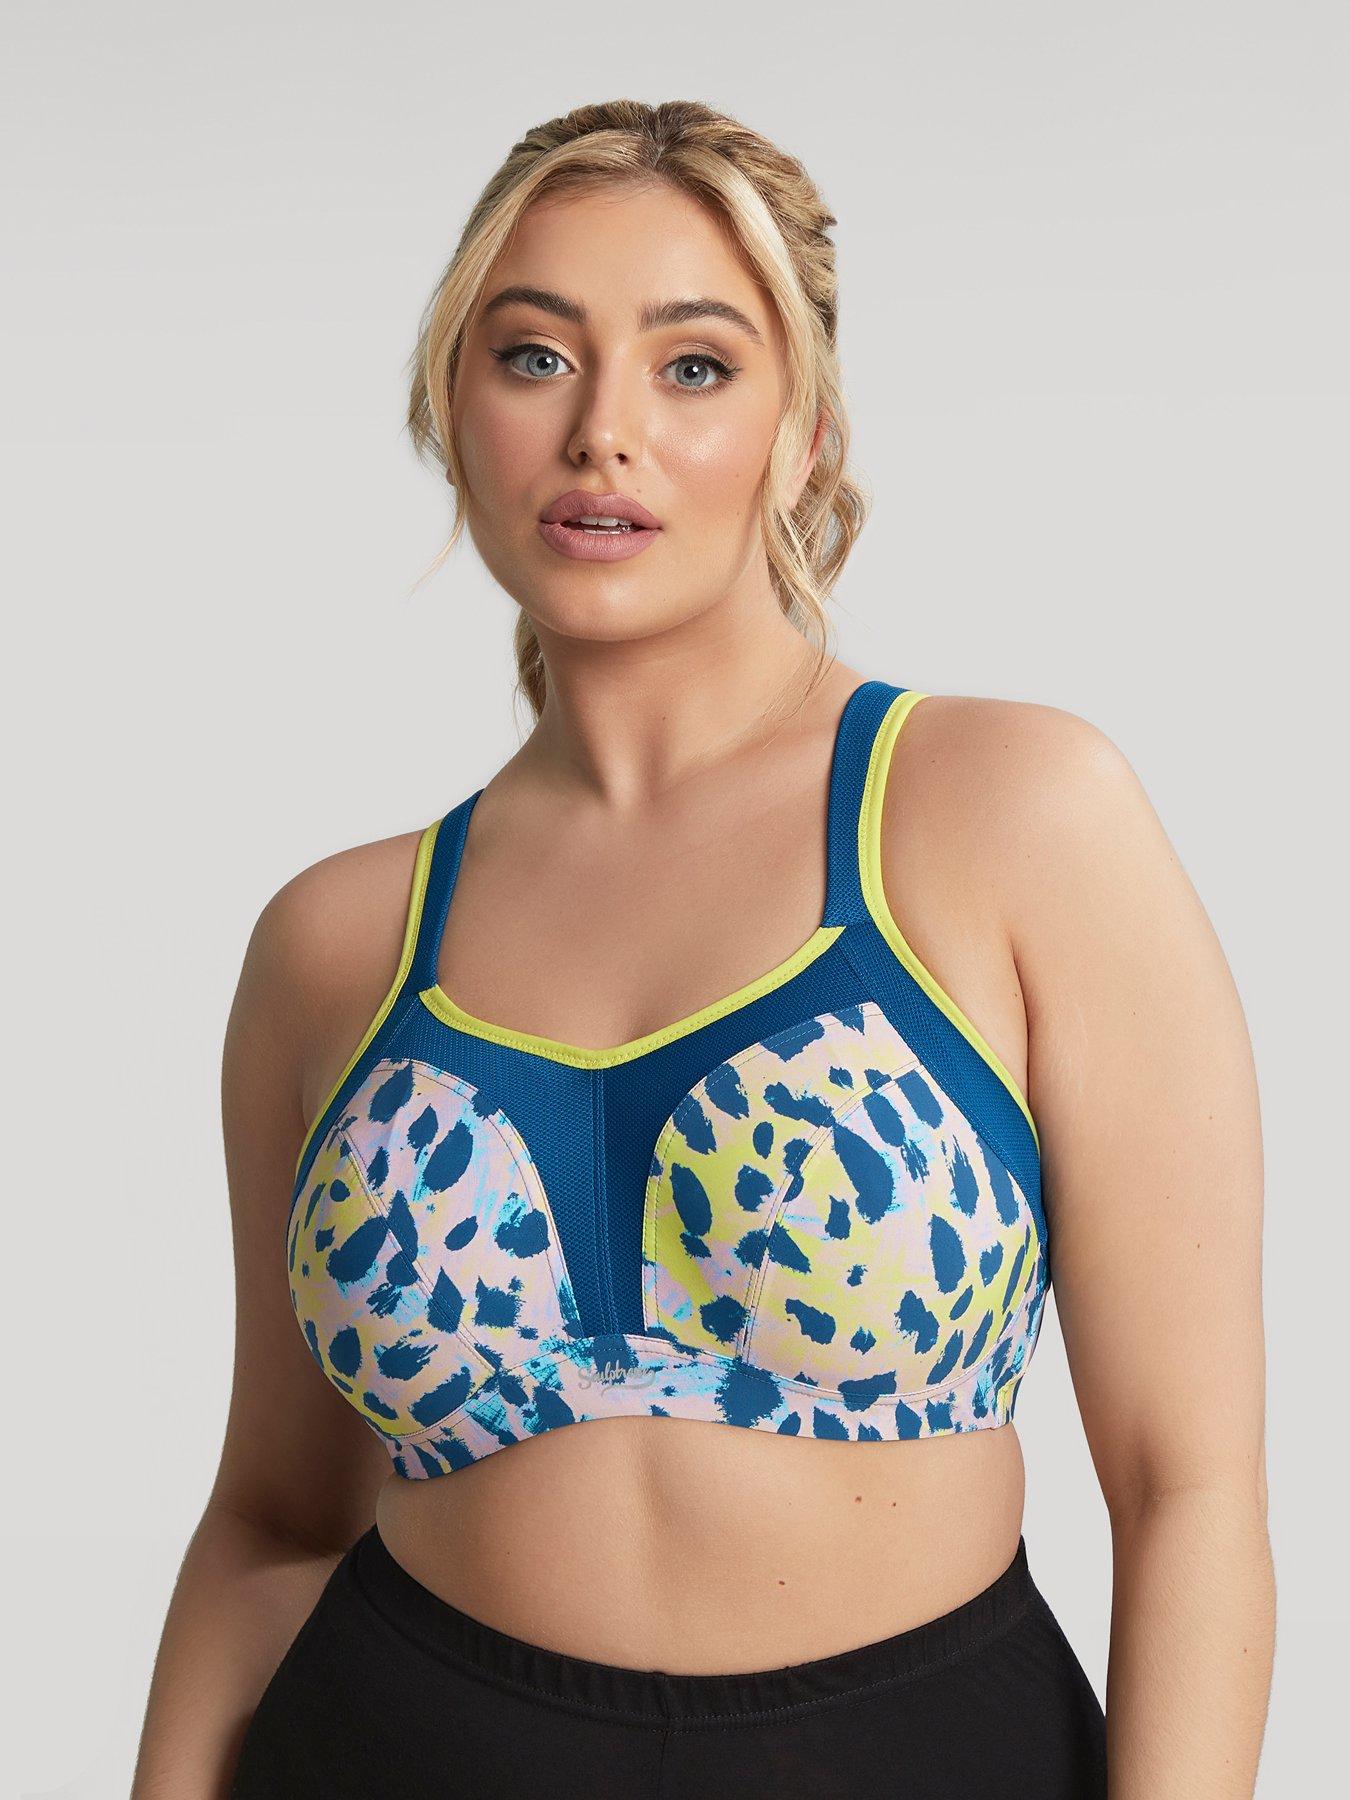 Panache Sport Lime High Impact Light Padding Full-Busted Sports